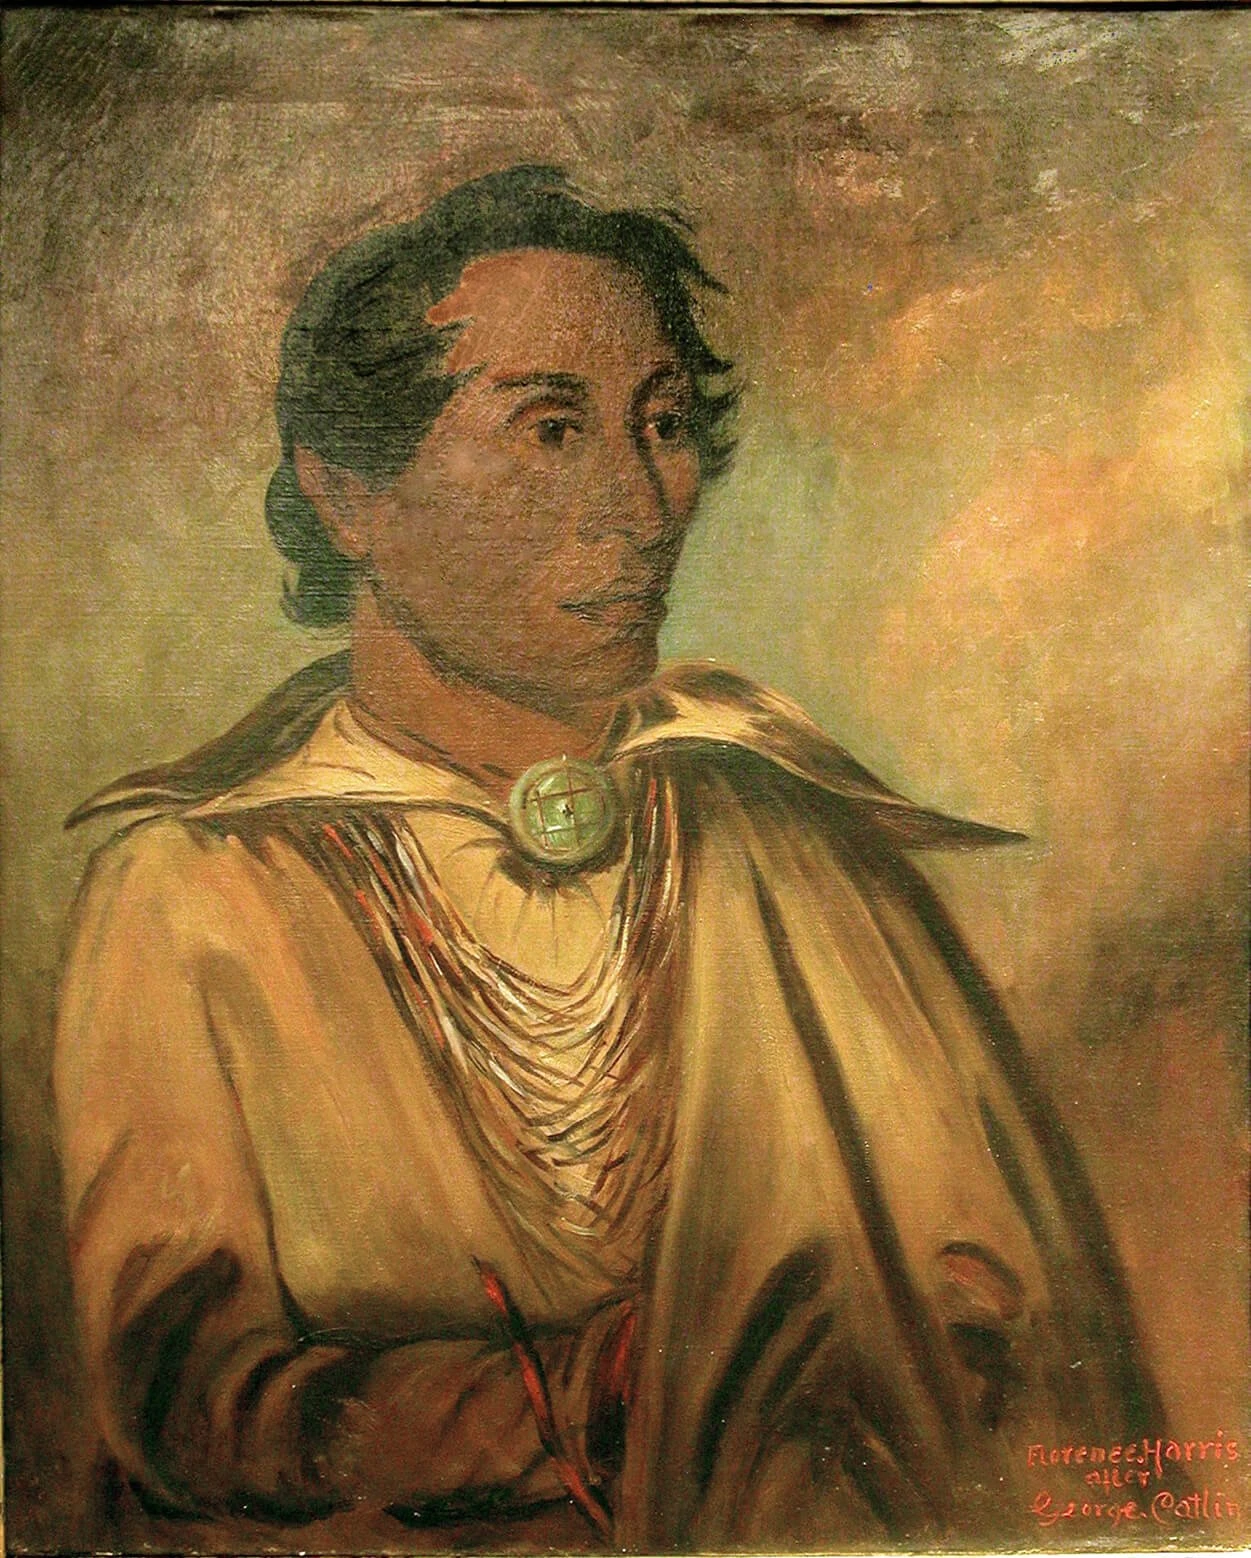 Illustrated portrait of a Native man with dark hair and a stern looking gaze, dressed in a flowing shirt and turquoise-colored necklace.